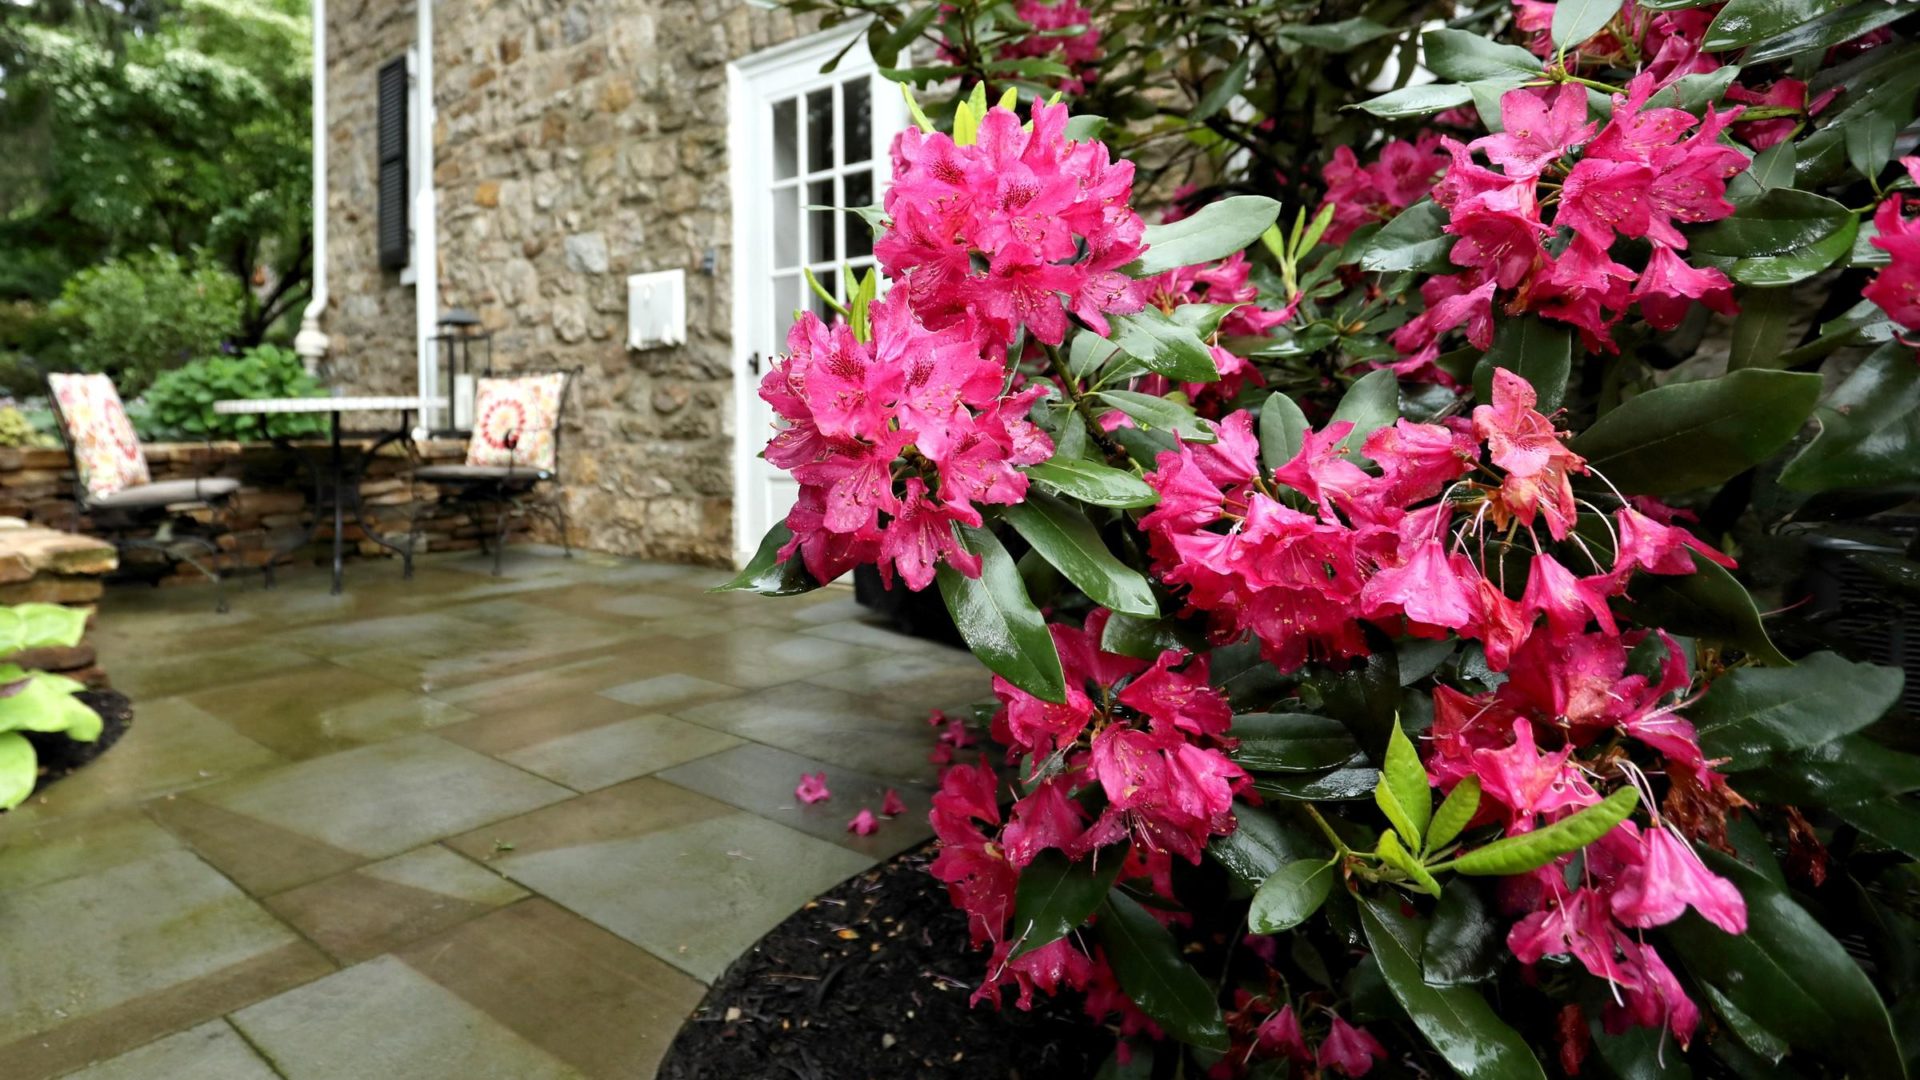 closeup of a rhododendron flower with a blurred stone patio in the background